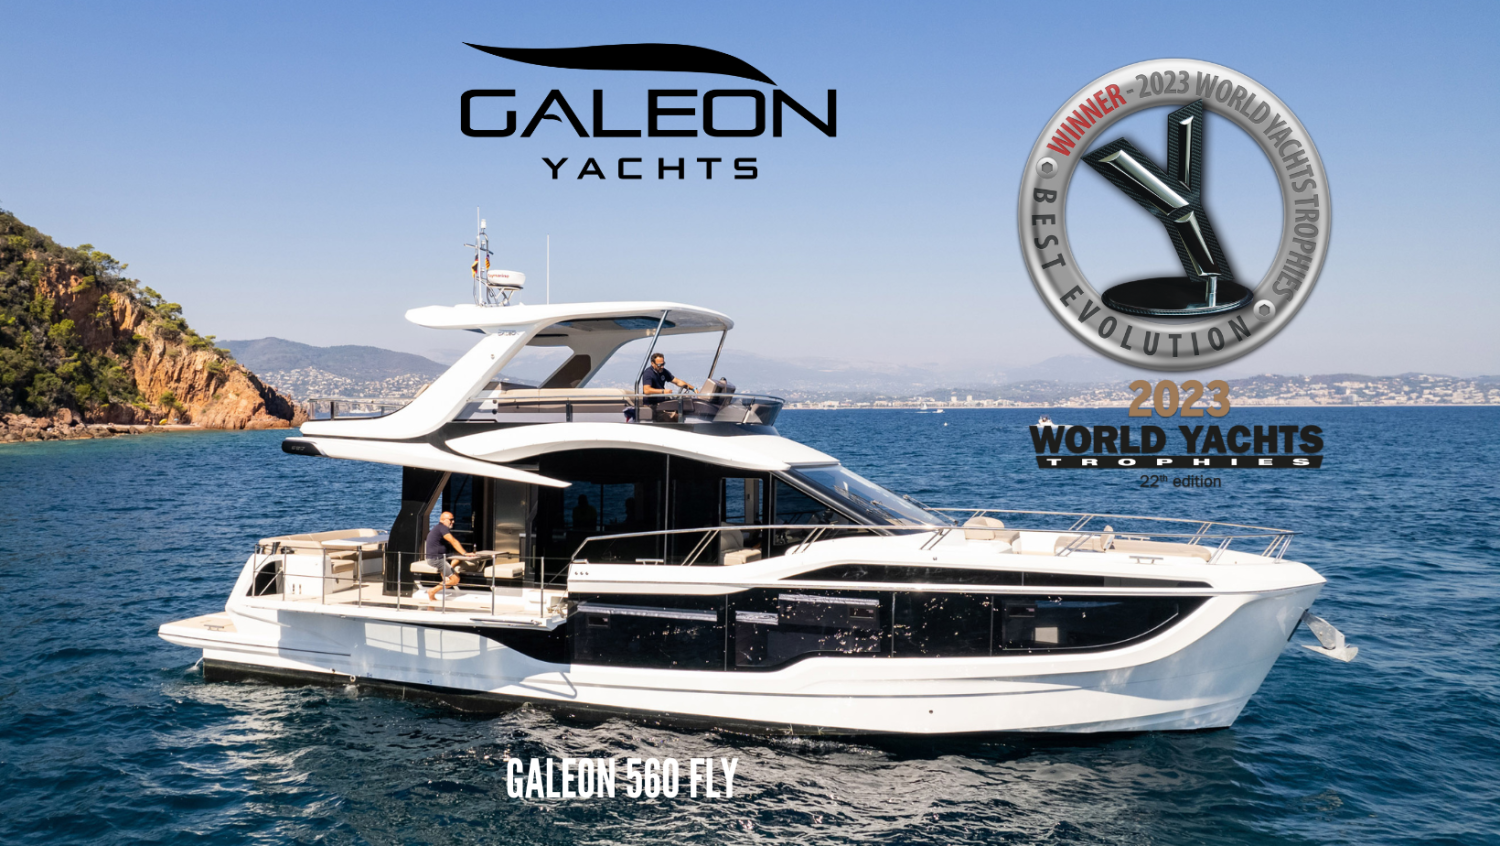 Image 1 for Galeon 560 FLY wins Best Evolution Award 2023 in Cannes!